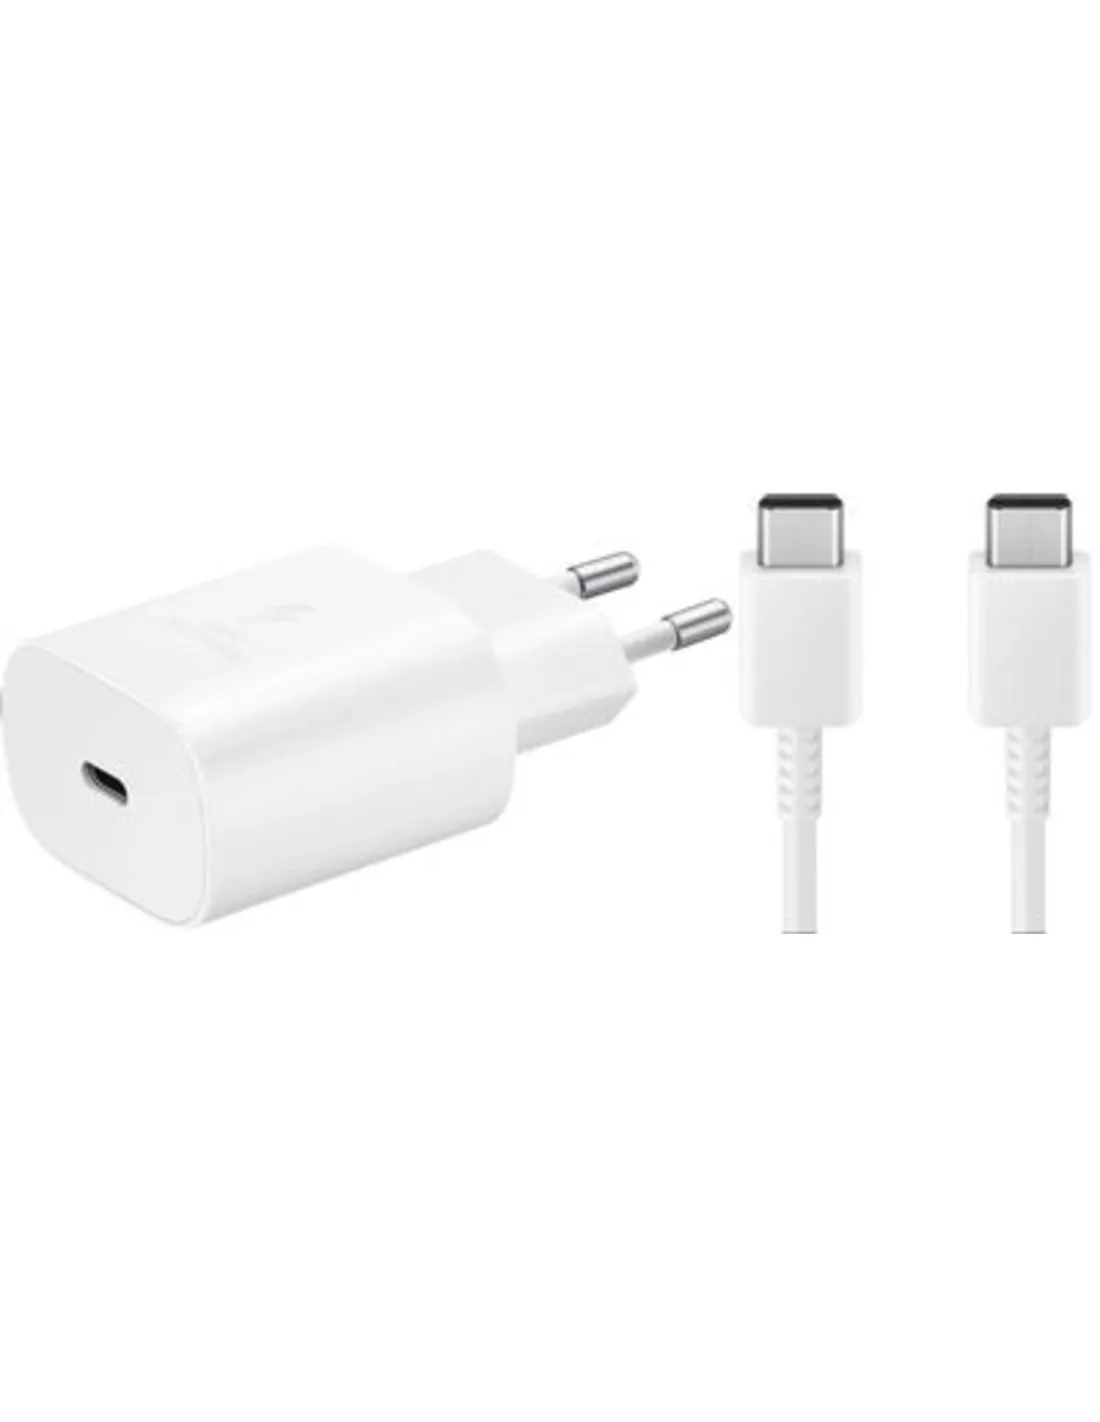 Samsung 25W USB-C Charger Fast Charging with Cable - EP-TA800